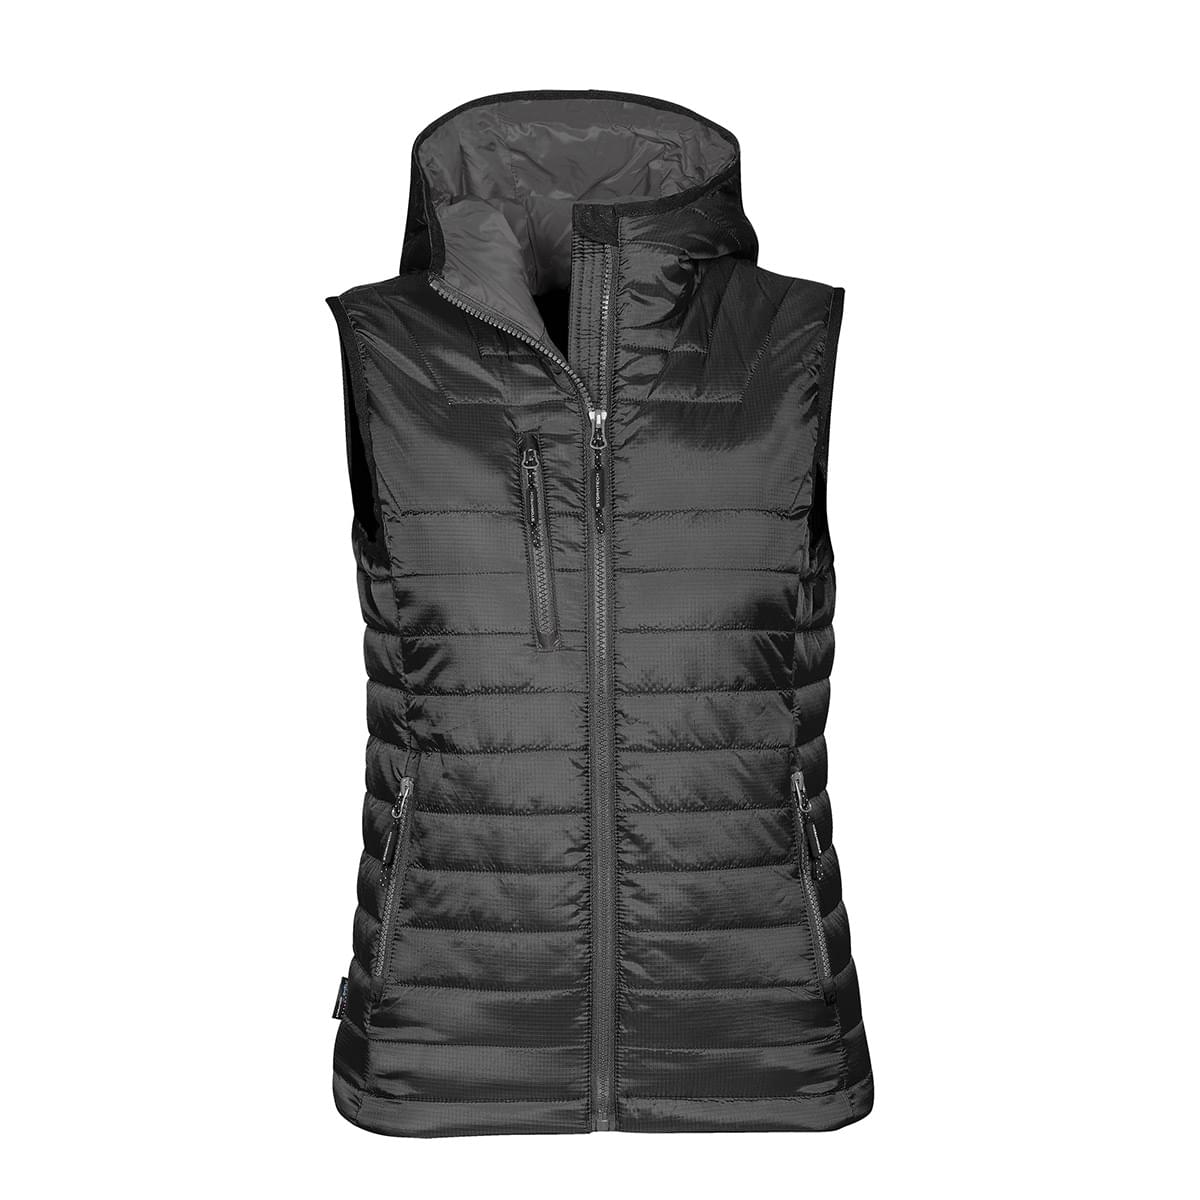 WHYIT Camisoles for Women Winter thermal vest women's plush